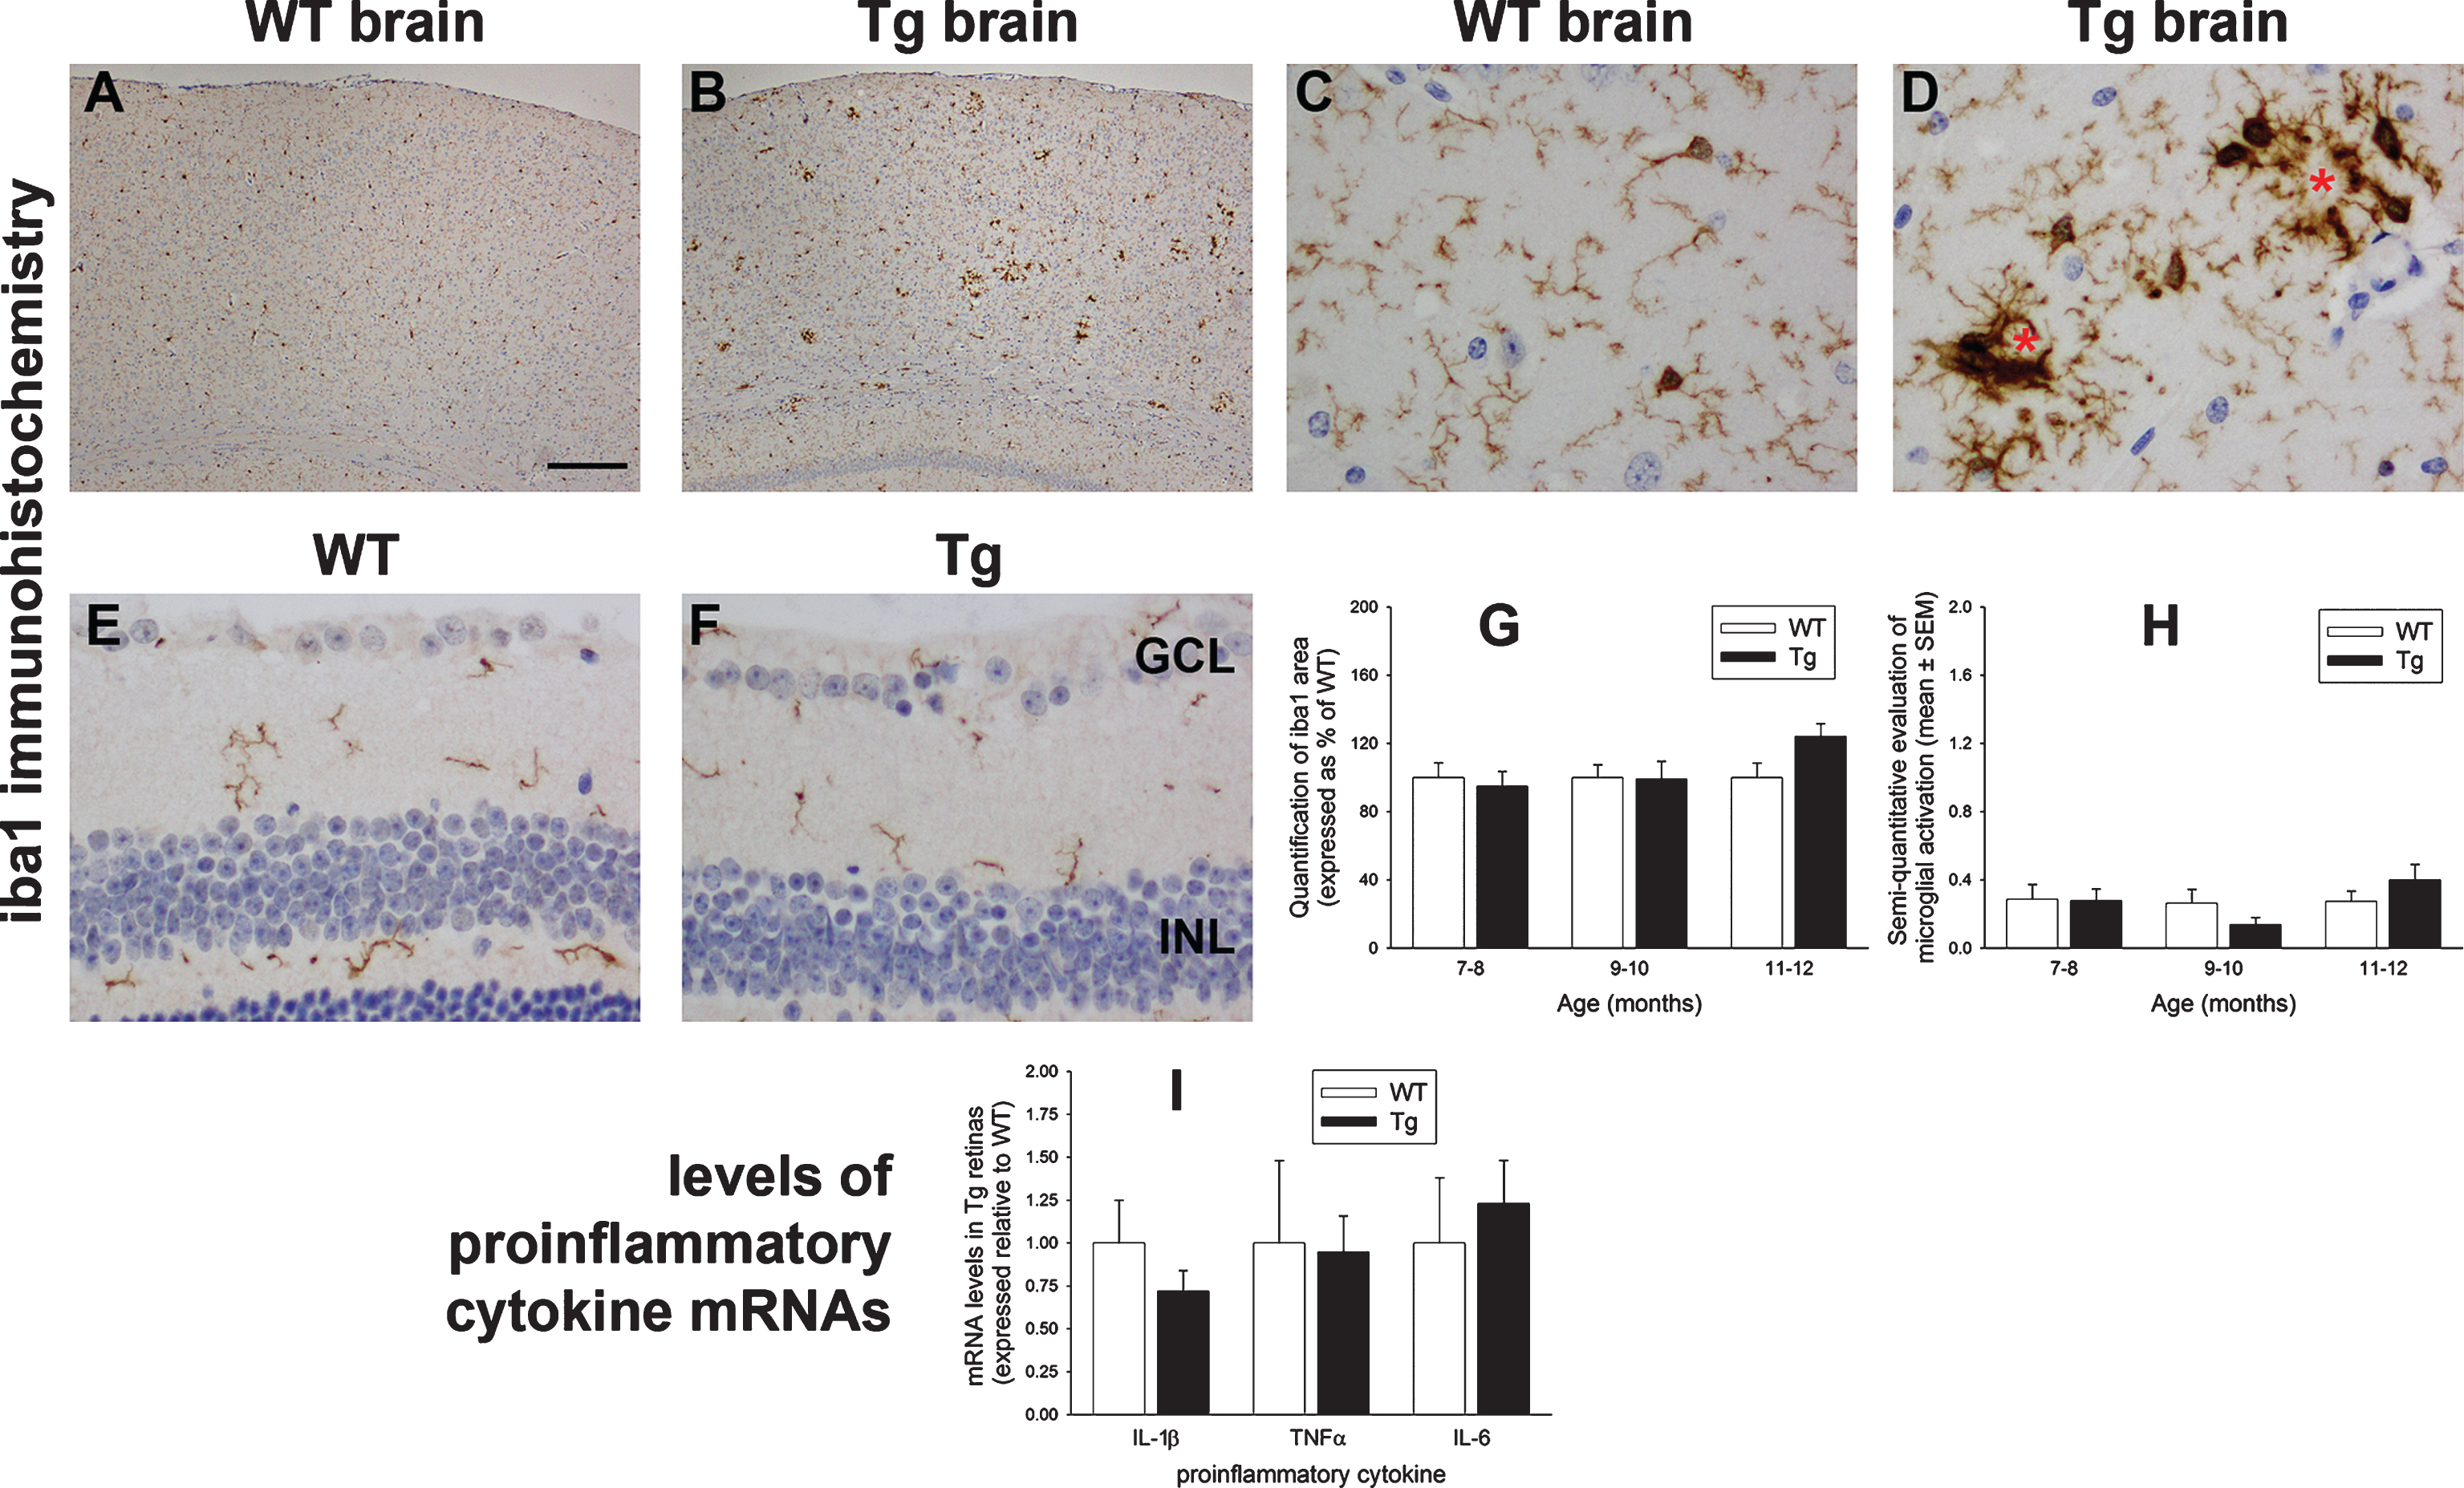 Analysis of microglia and proinflammatory cytokine levels in WT and Tg mice. Representative images of iba1 immunolabeling in 10-month-old WT and Tg parietal cortex (A, B) and hippocampus (C, D). In Tg brains, reactive microgliosis is evident surrounding amyloid plaques, signified by red asterisks. E, F) Representative images of iba1 immunolabeling in 11-month-old WT and Tg retina. Microglia in both cohorts display ramified morphologies. G, H) Quantitative evaluation of iba1 area and semi-quantitative evaluation of activations status of iba1-positive cells. (I) Levels of IL-1β, TNFα, and IL-6 in Tg retinas as measured by qPCR. Data are normalized for GAPDH and expressed relative to WT. For all analyses, data are expressed as mean±SEM, where n = 10 for each age-matched group. Student’s unpaired t-tests revealed no significant differences between WT and Tg cohorts for any of the parameters measured. Scale bar: A, B = 250 μm; C-F = 25 μm. GCL, ganglion cell layer; INL, inner nuclear layer; ONL, outer nuclear layer.